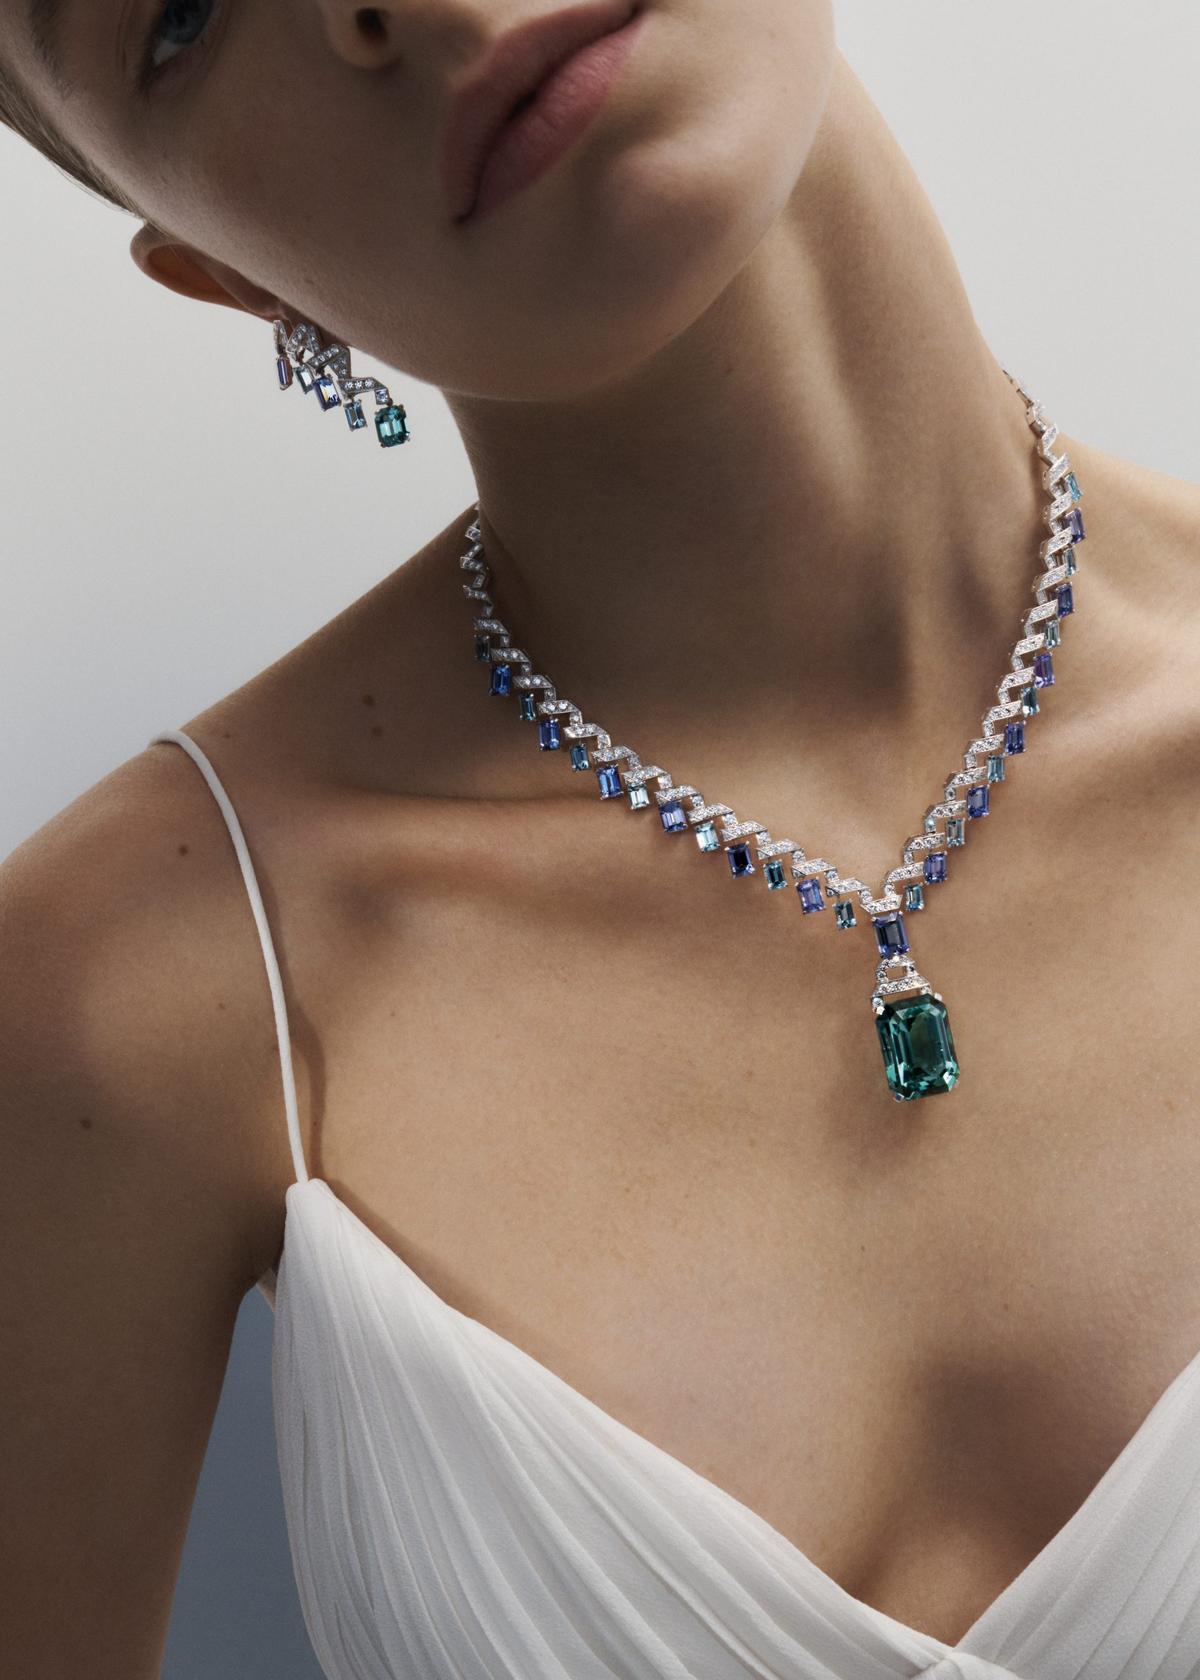 EXCLUSIVE: Louis Vuitton to Take Amfitheatrof's First High Jewelry